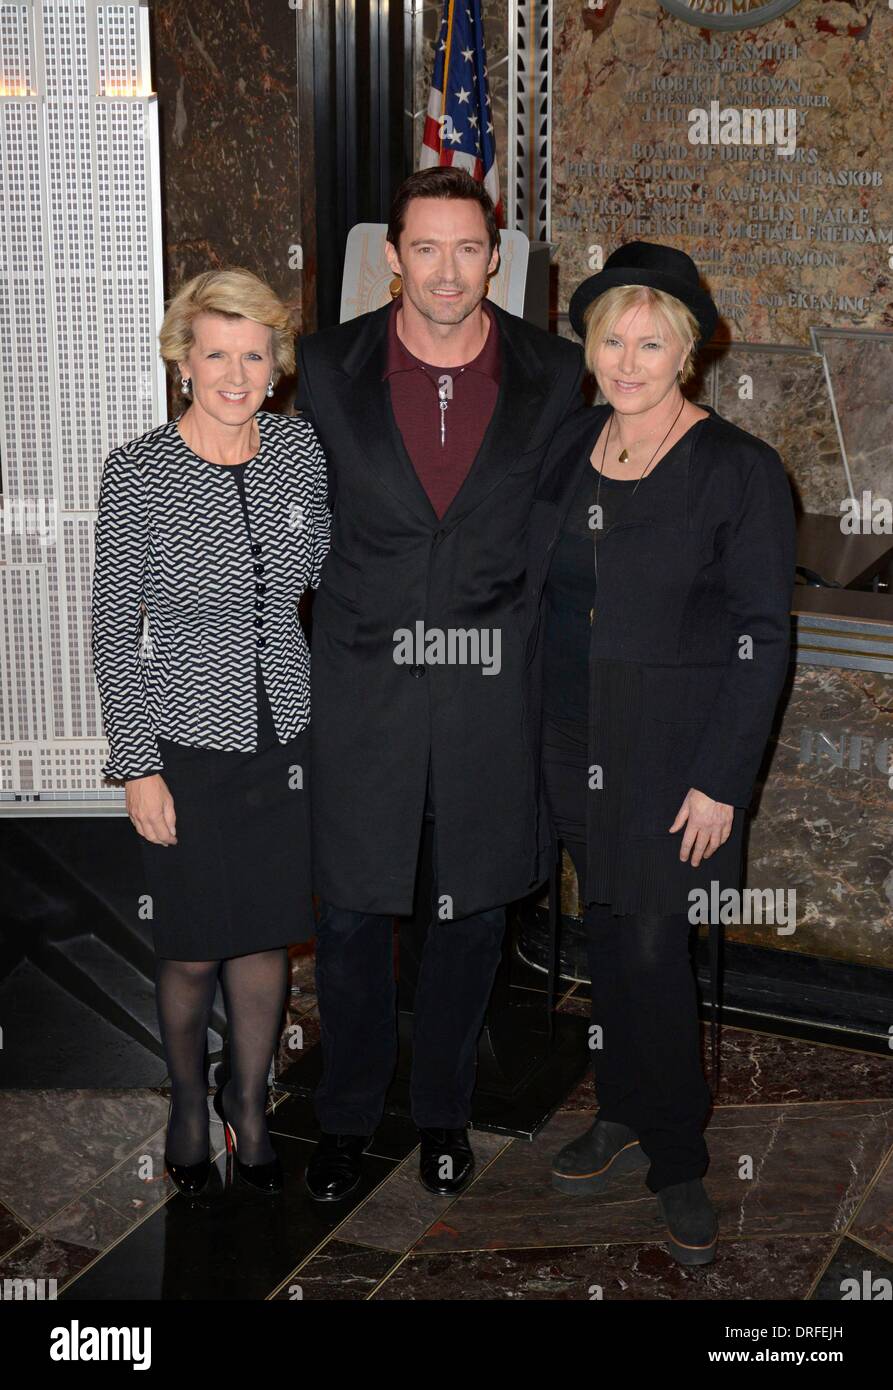 New York, NY, USA. 24th Jan, 2014. Julie Bishop: Australian Minister for Foreign Affairs, Hugh Jackman, Deborra-lee Furness at the press conference for Empire State Building Lighting in Honor of Australia Day, Empire State Building, New York, NY January 24, 2014. Credit:  Derek Storm/Everett Collection/Alamy Live News Stock Photo